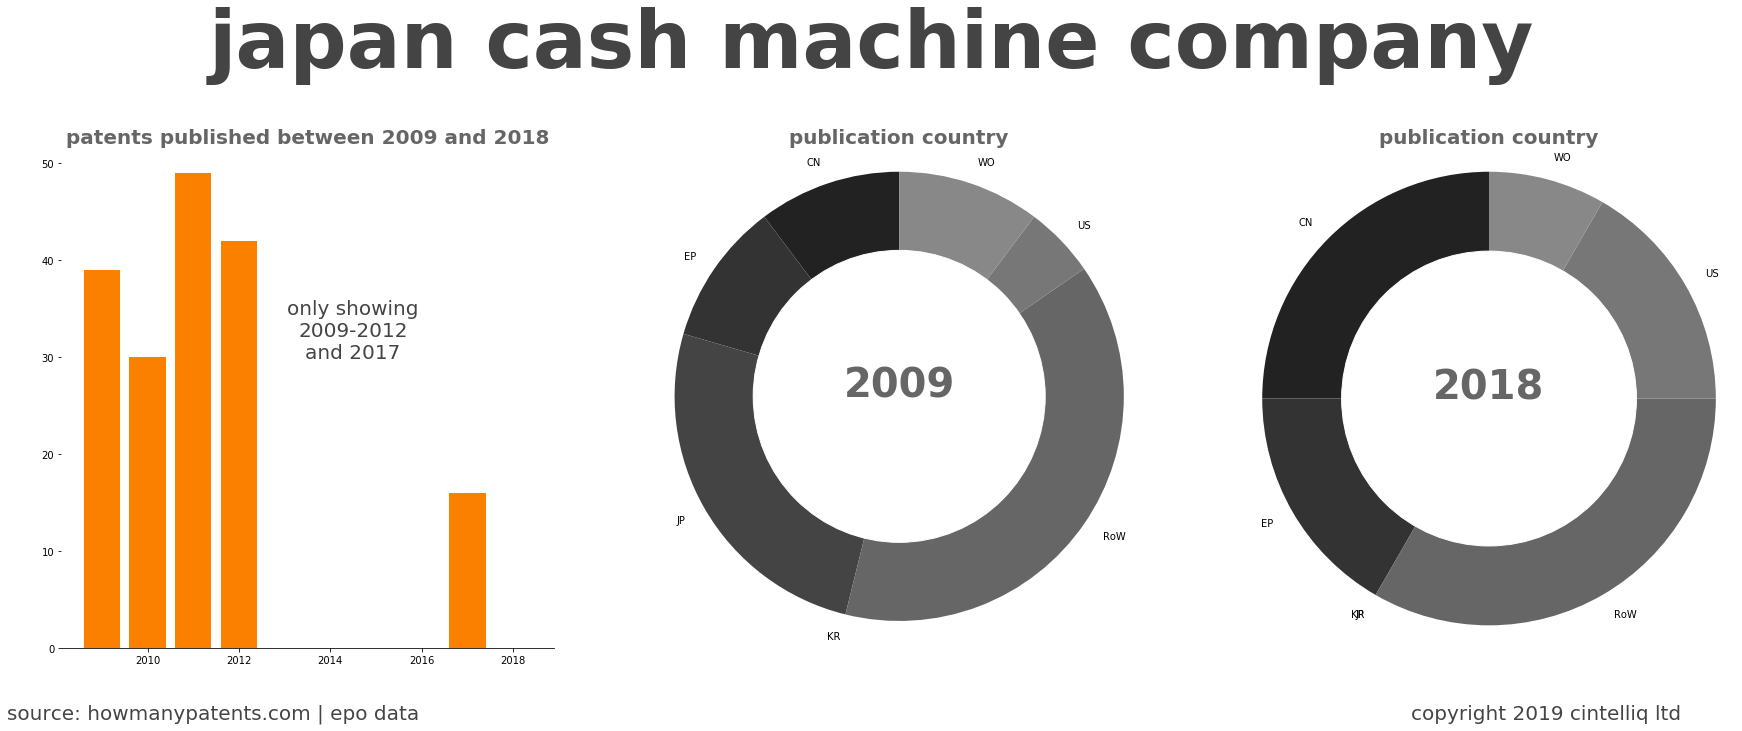 summary of patents for Japan Cash Machine Company